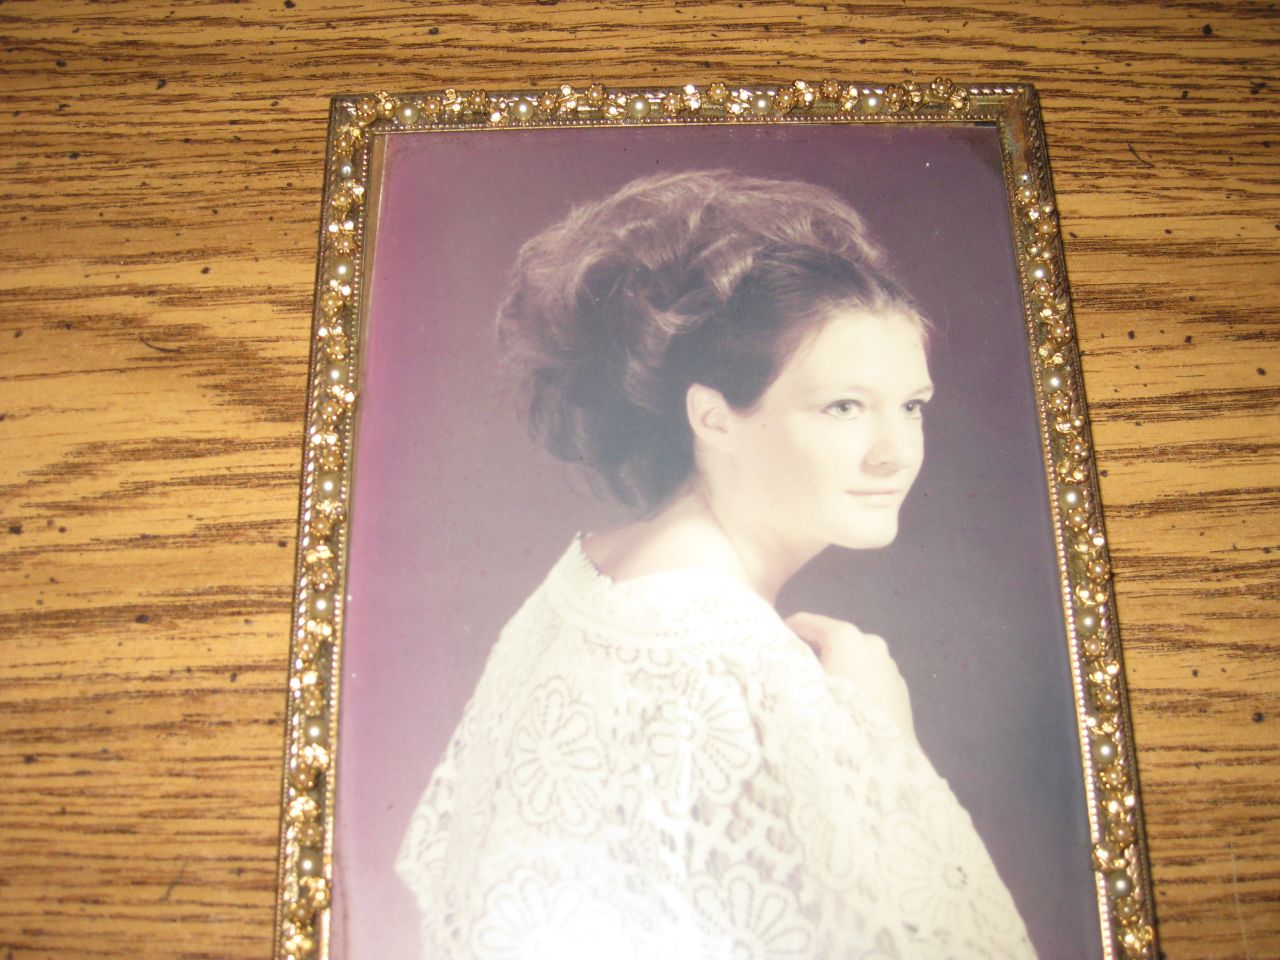 <a href="http://ireport.cnn.com/docs/DOC-1065578">iReporter Kathi Cordsen</a> from Fullerton, California, sent in this photo of her own hair from the 1960s. "Big hair was pretty much the fad in the '60s where I grew up in California. The higher, the better," she said.